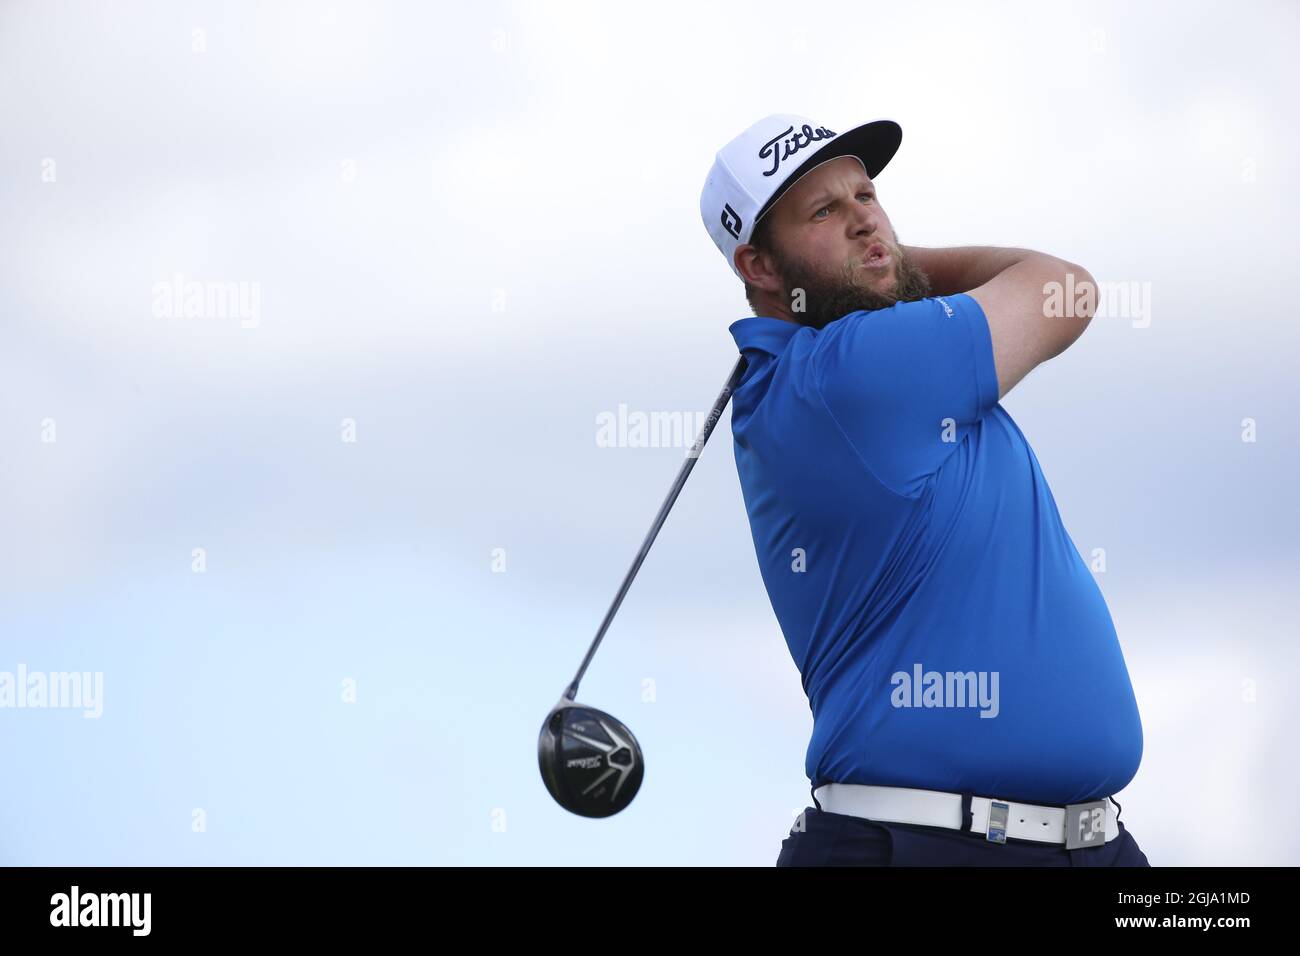 England's Andrew Johnston on the second tee during the last round at Bro Hof golf club the Nordea Masters tournament Sunday June 5, 2016. Foto: Fredrik Persson / TT / Kod 75906  Stock Photo